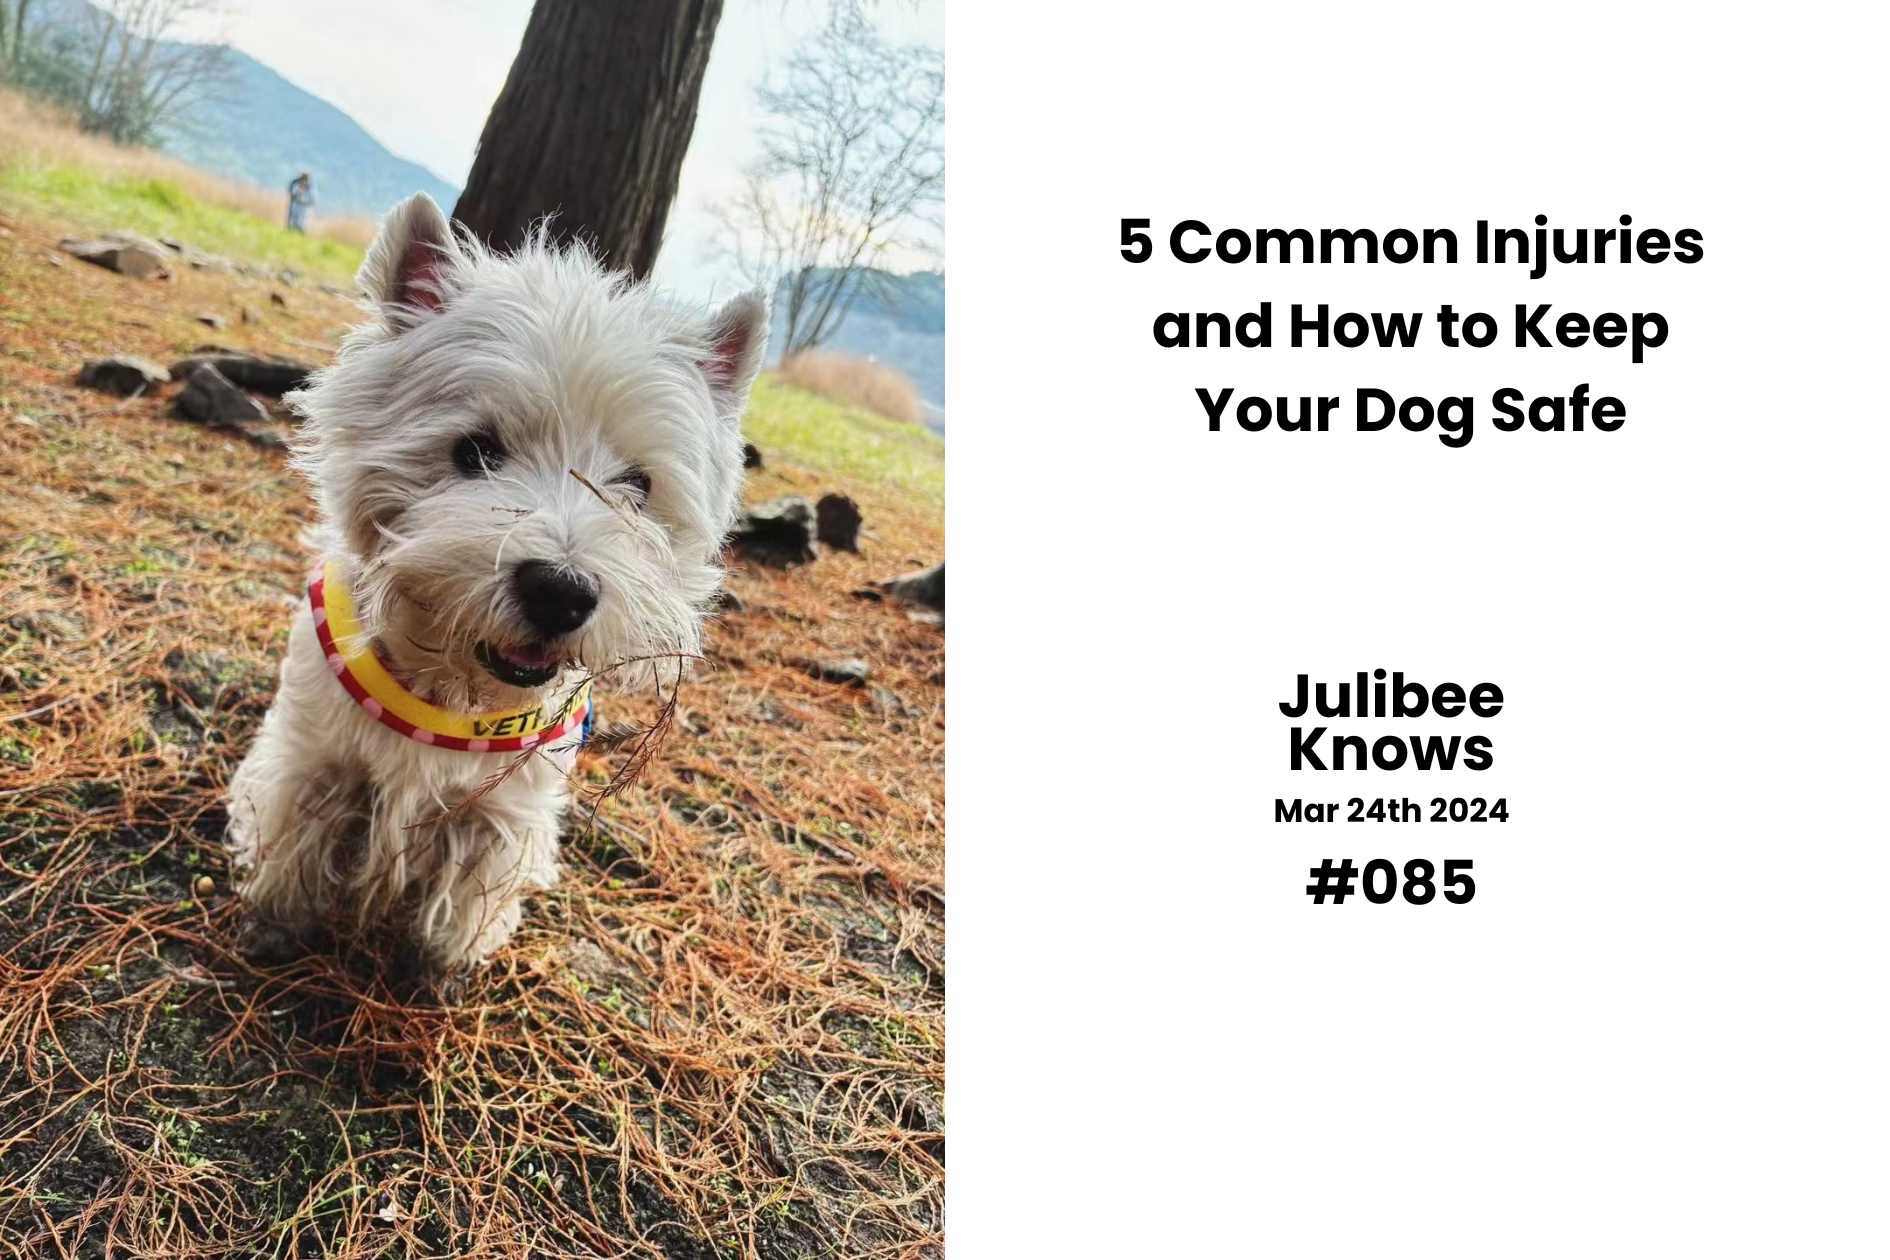 5 Common Injuries and How to Keep Your Dog Safe